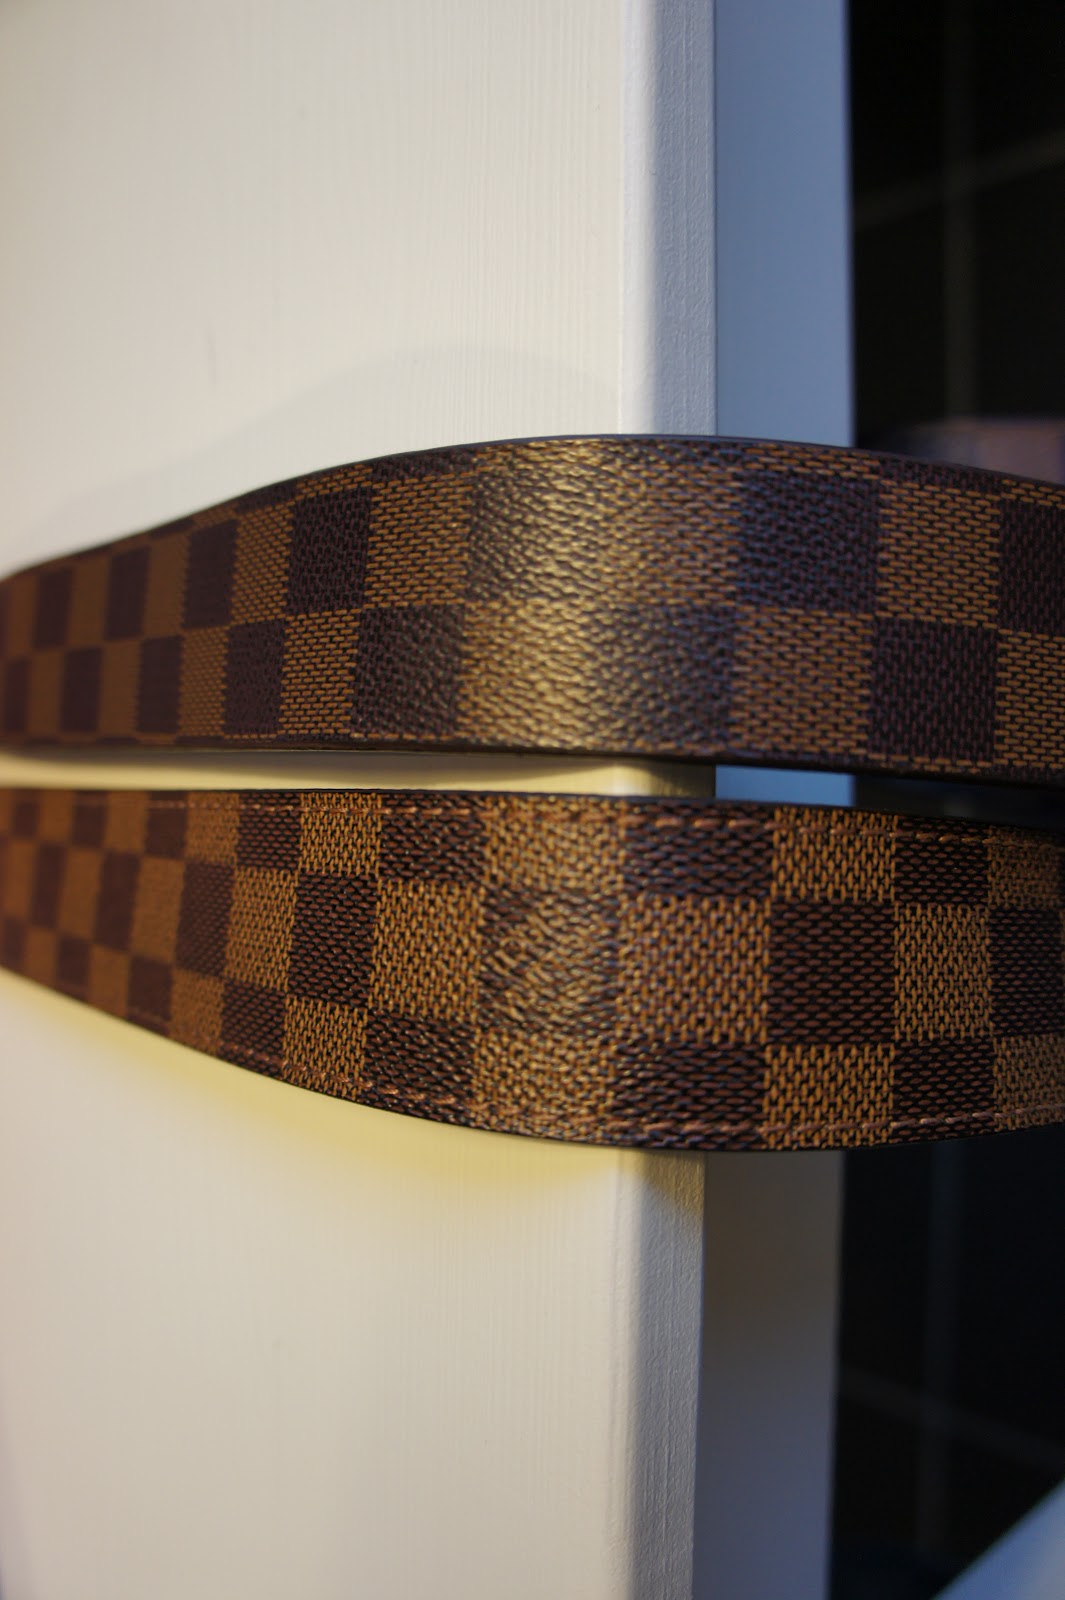 how to authenticate louis vuitton belt